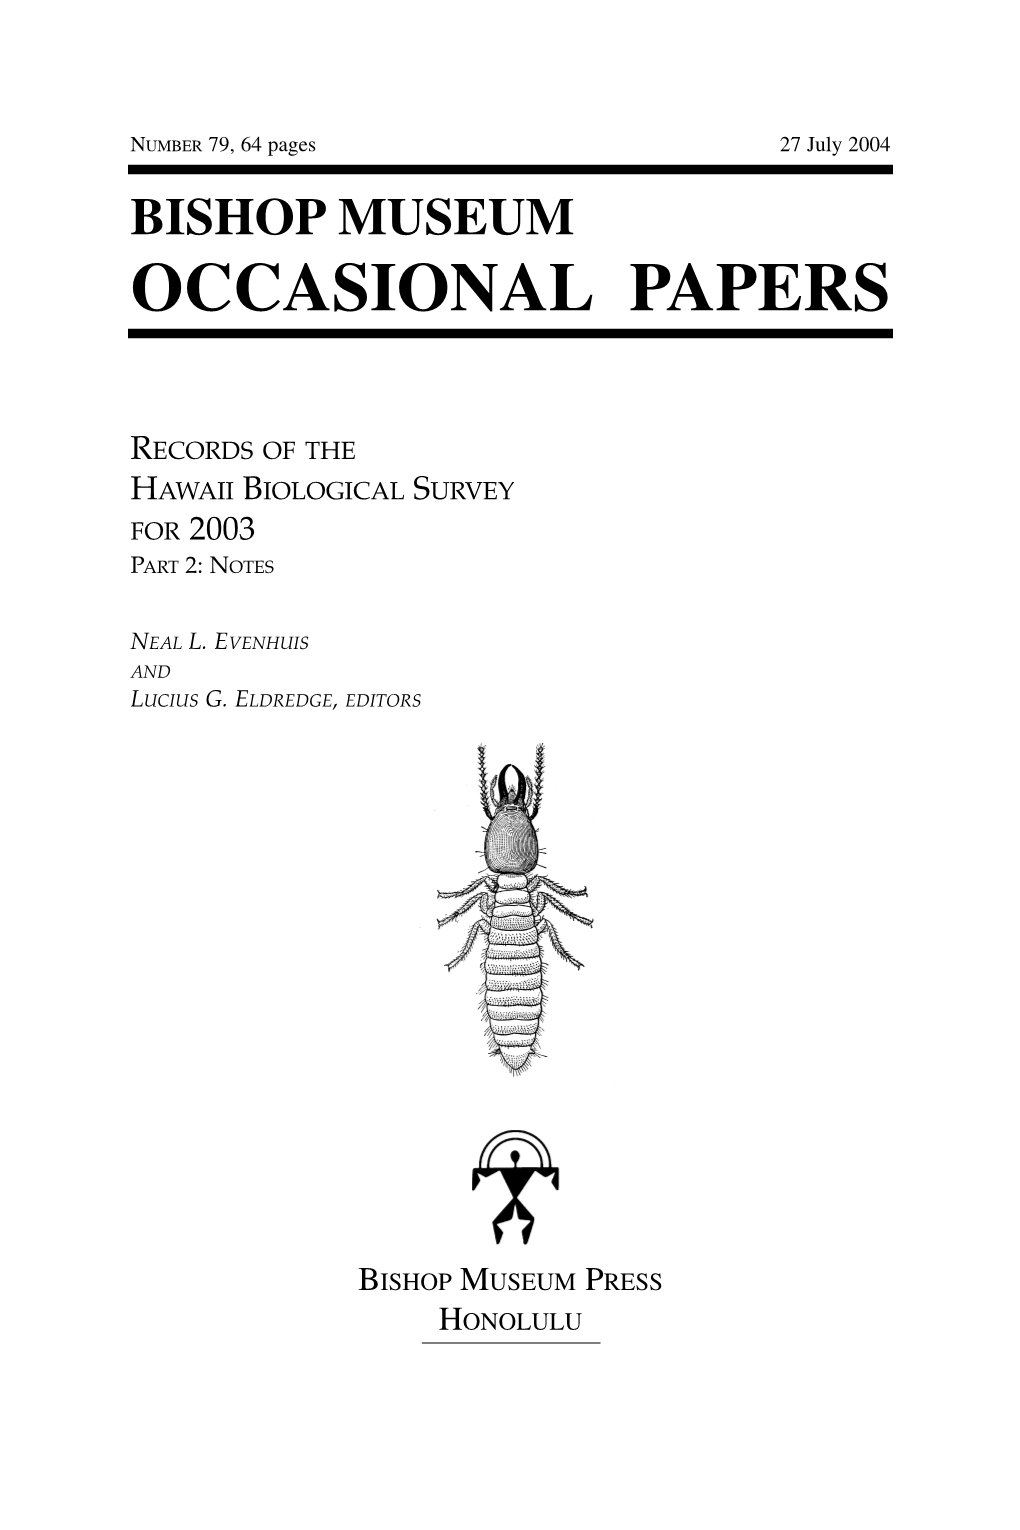 Records of the Hawaii Biological Survey for 2003 Part 2: Notes